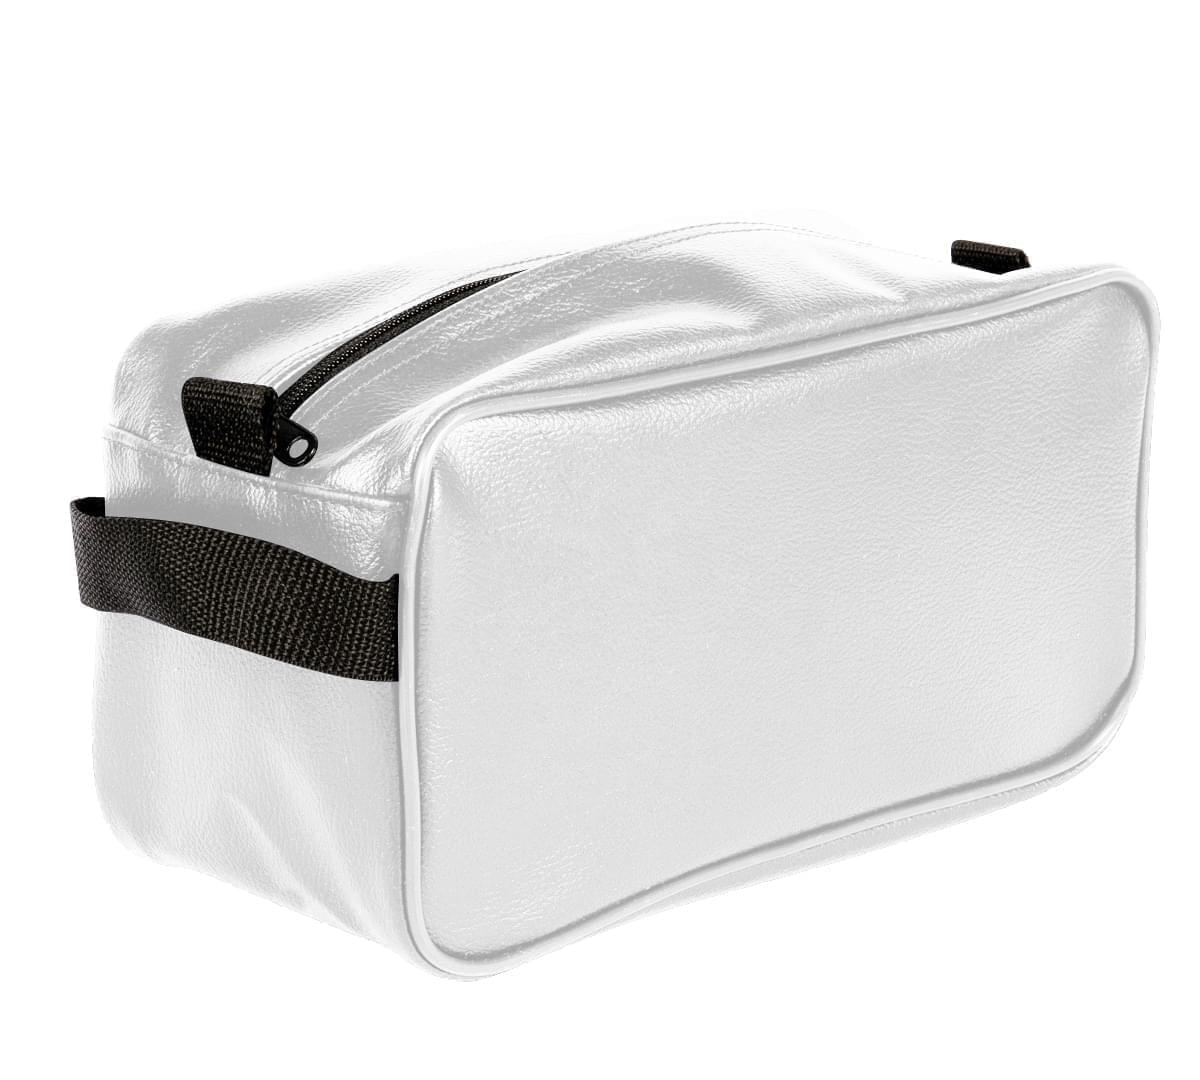 USA Made Cosmetic & Toiletry Cases, White-Black, 3000996-A3R